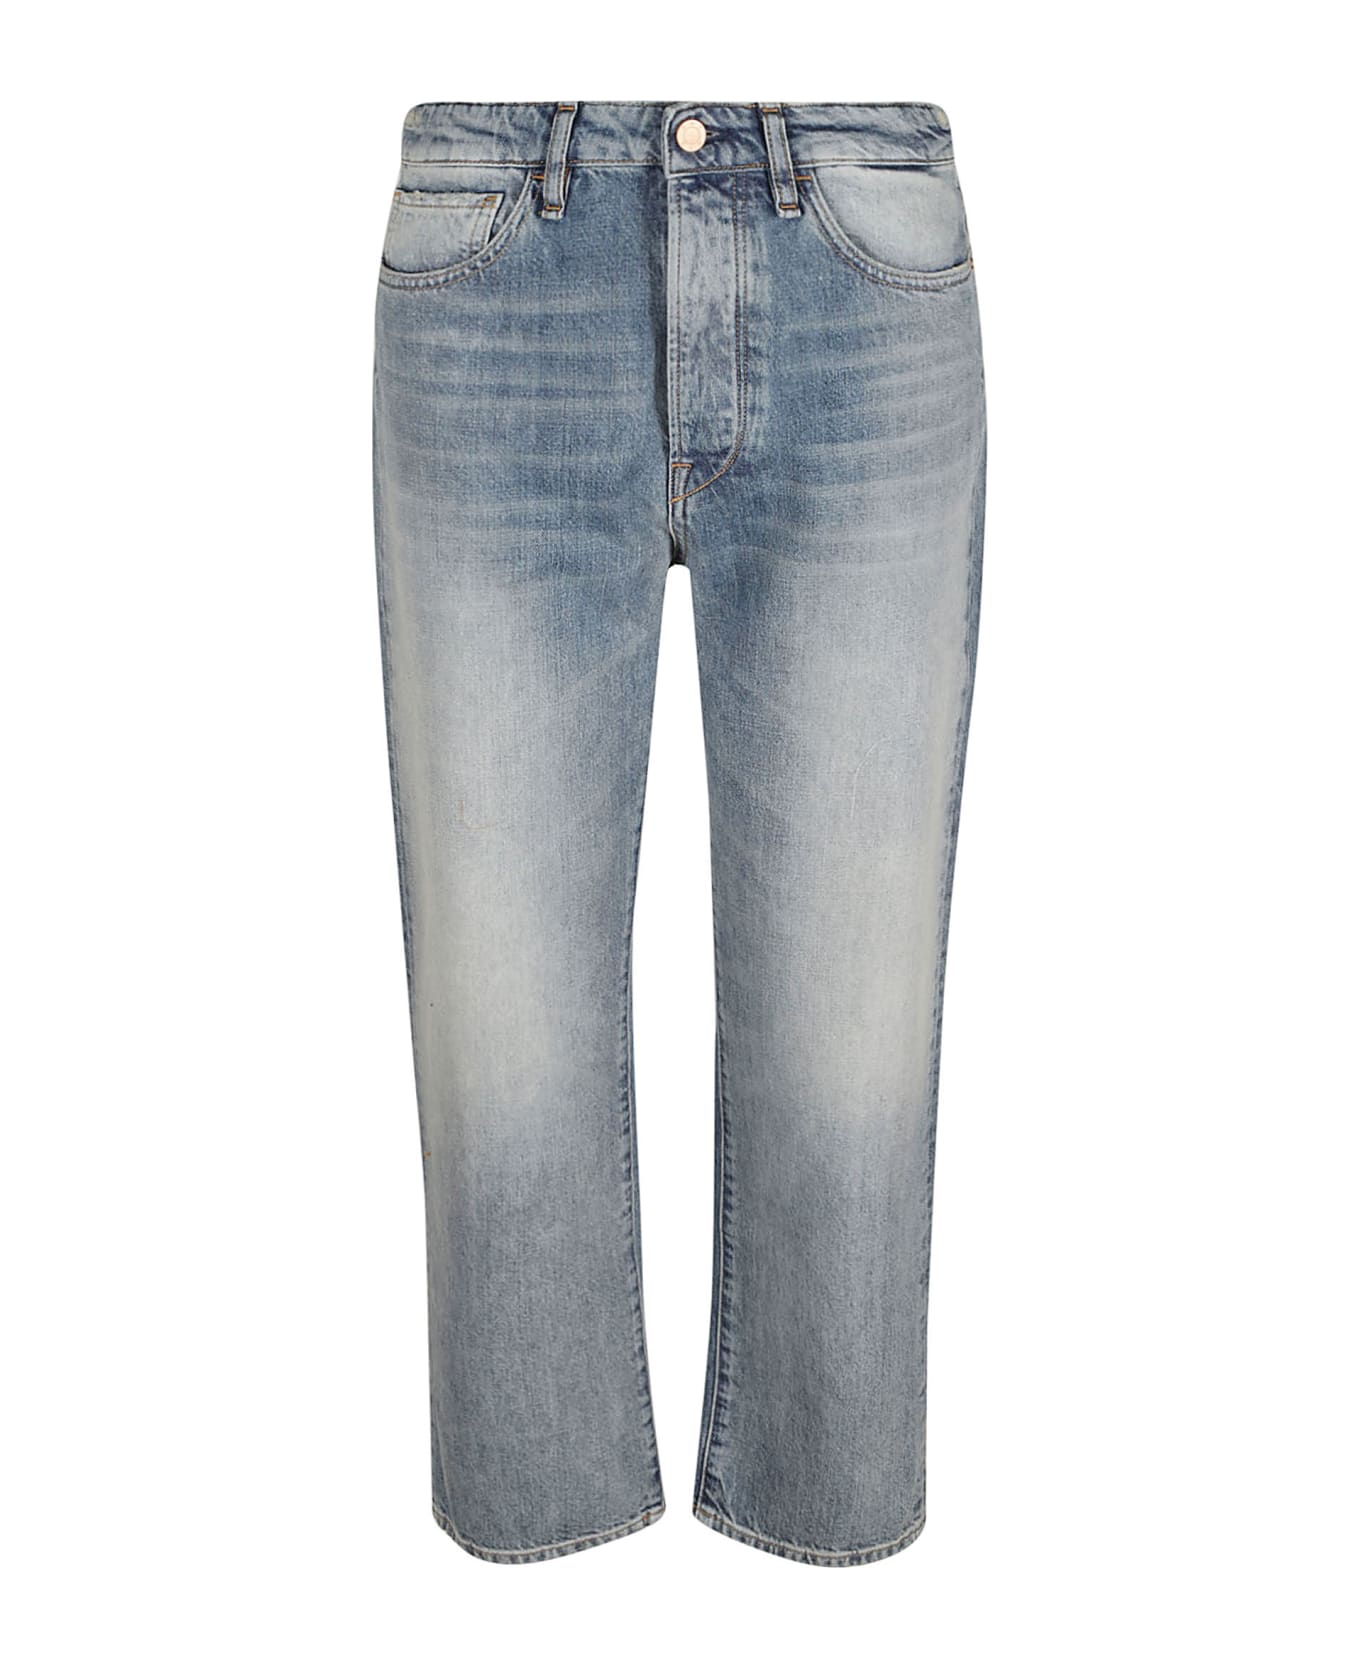 3x1 Buttoned Classic Jeans - Sky Blue